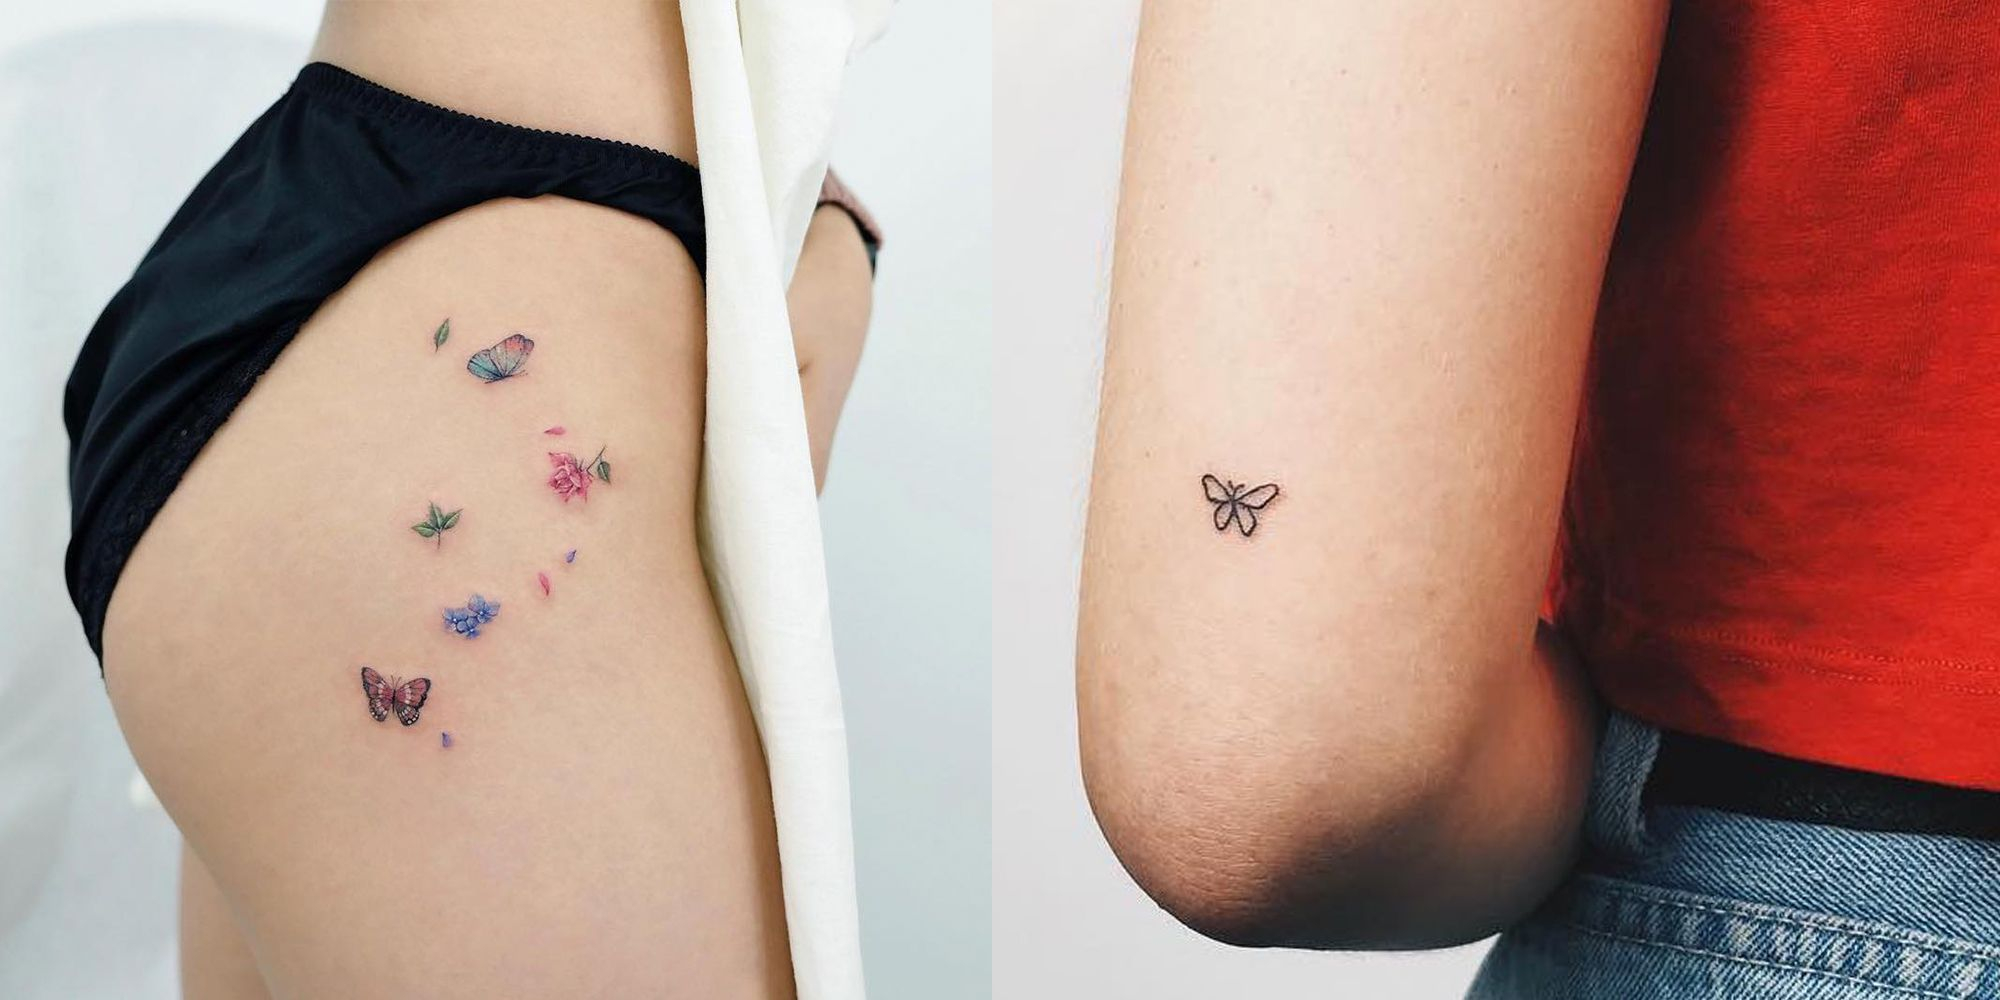 17 Butterfly Tattoo Ideas That Are Pretty Not Tacky Pictures Of intended for size 2000 X 1000